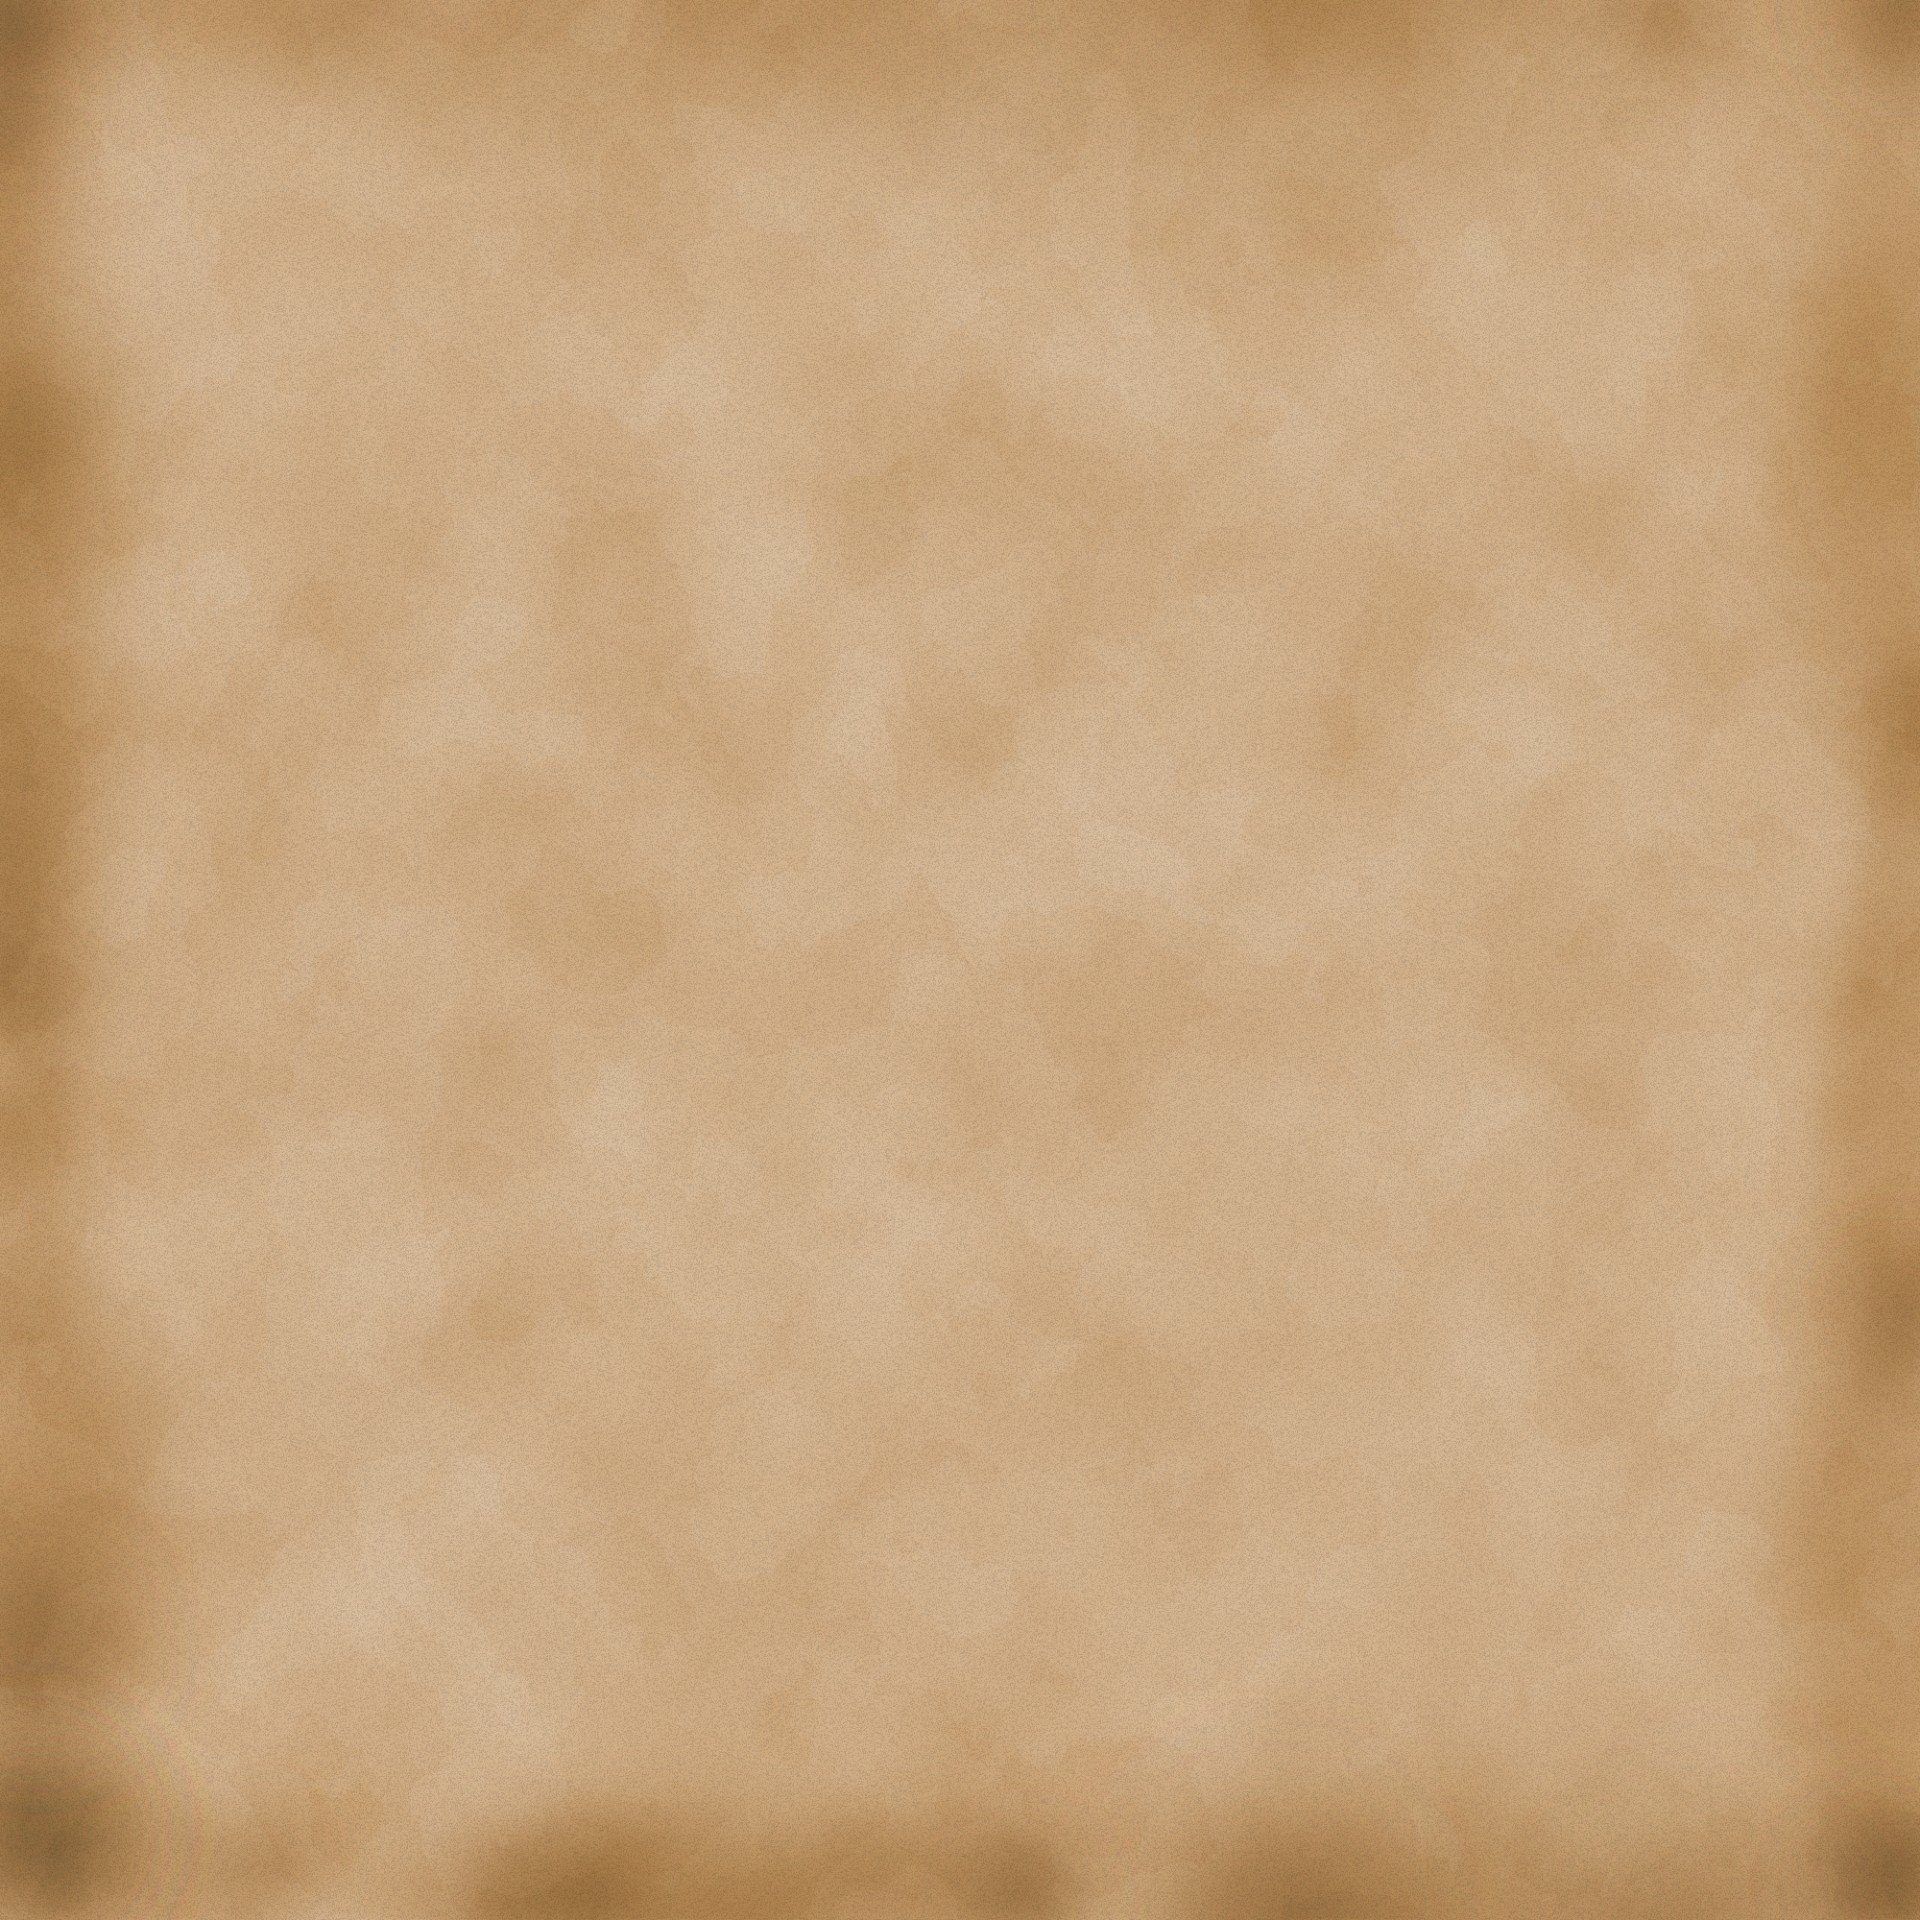 1920x1920 Old Paper Background Texture